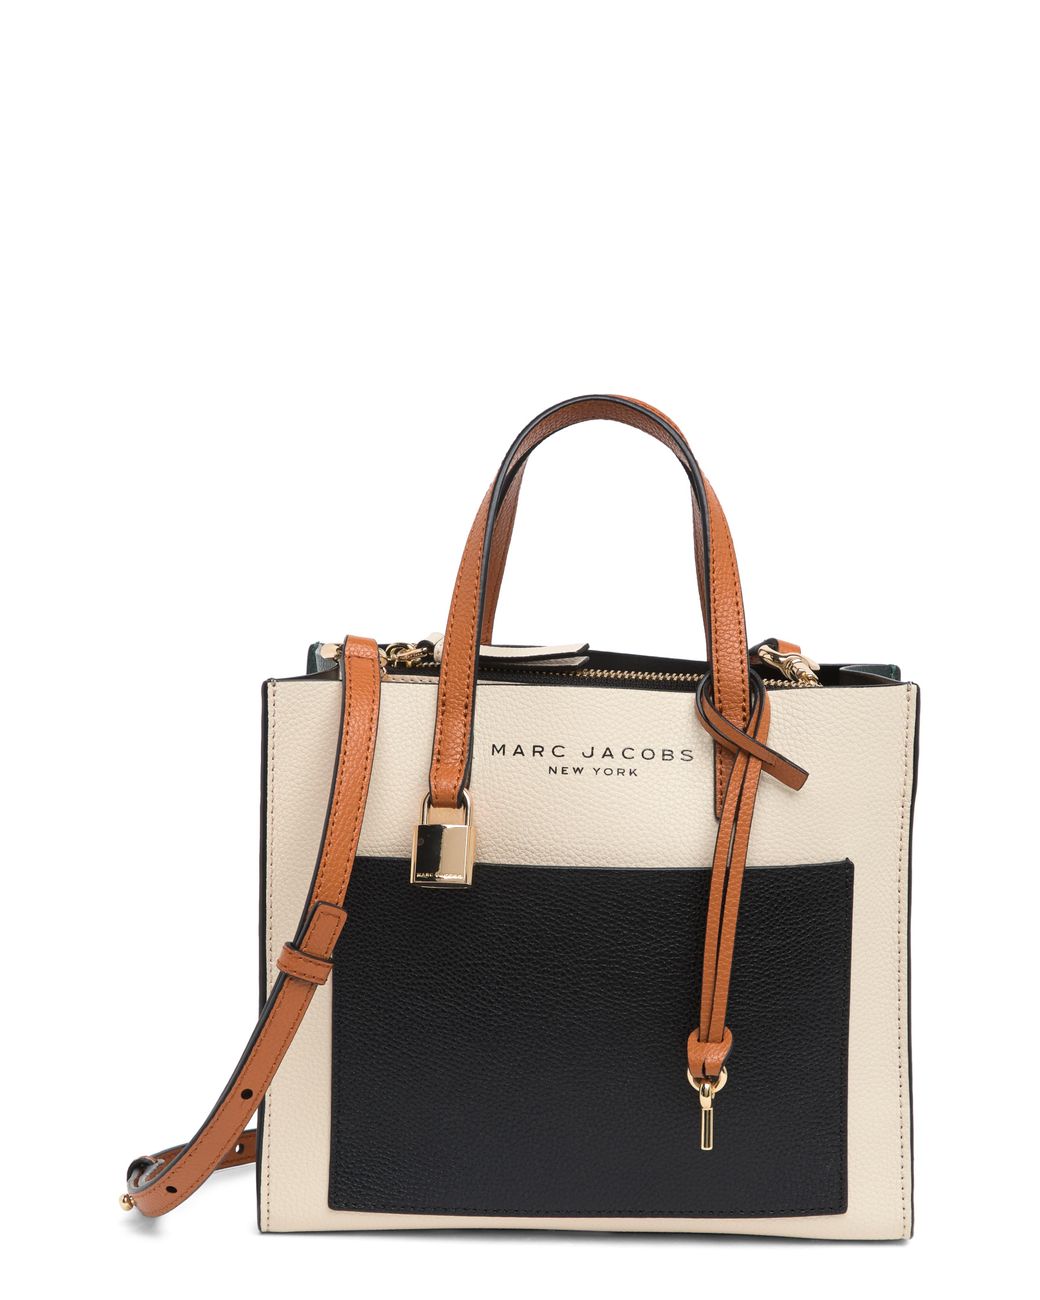 Marc Jacobs Mini Grind Colorblock Leather Tote Bag in Black | Lyst